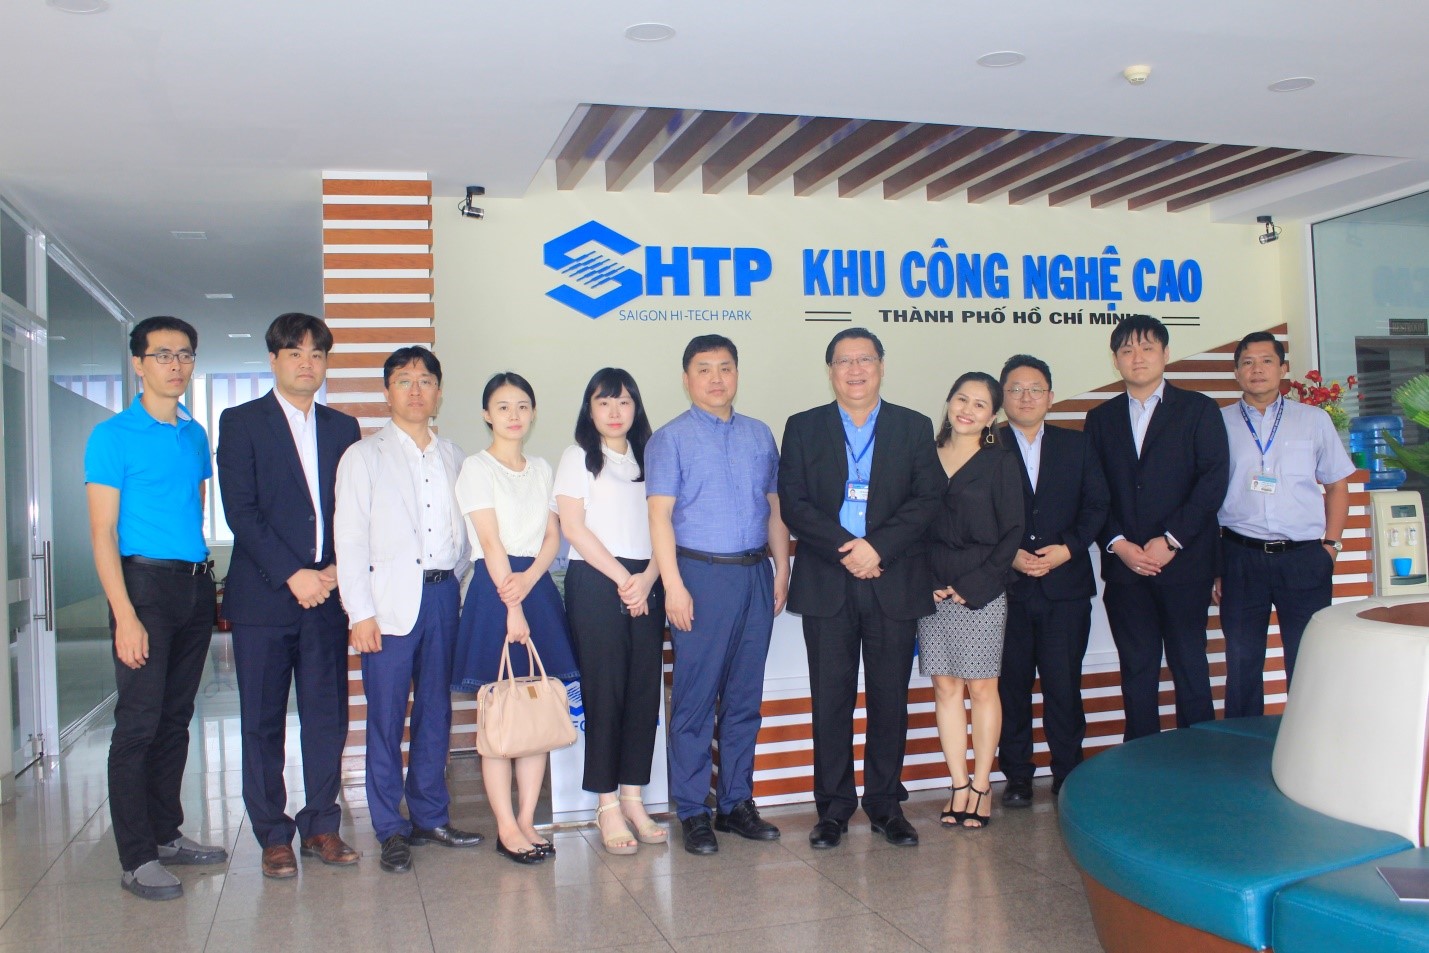 The Ministry of Unification of Korea paid a working visit to SHTP